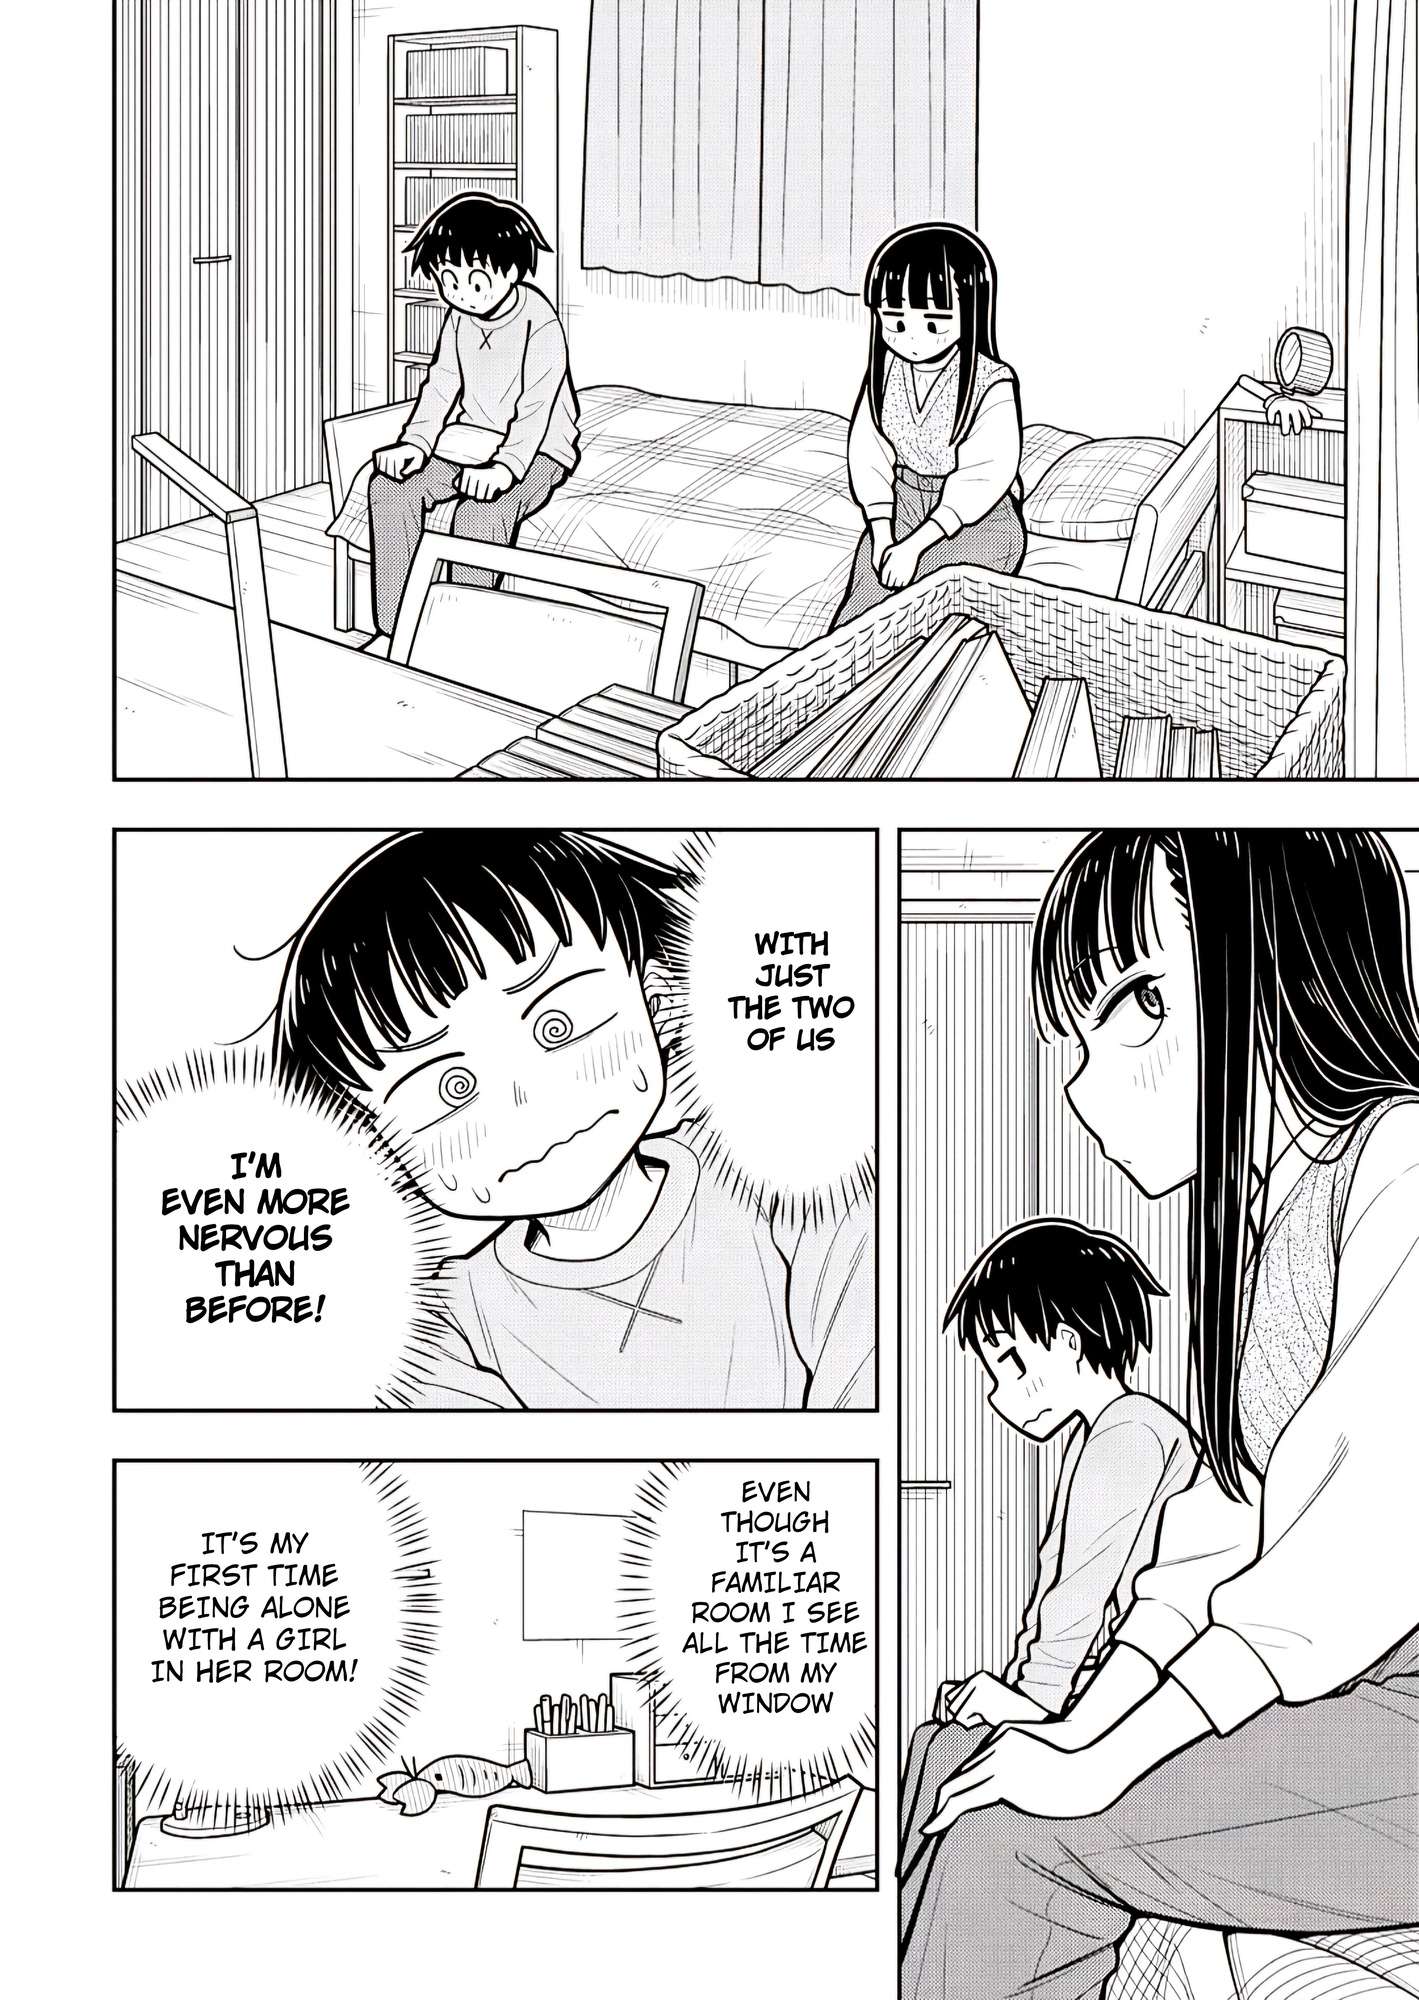 Starting Today She's My Childhood Friend - chapter 103 - #2